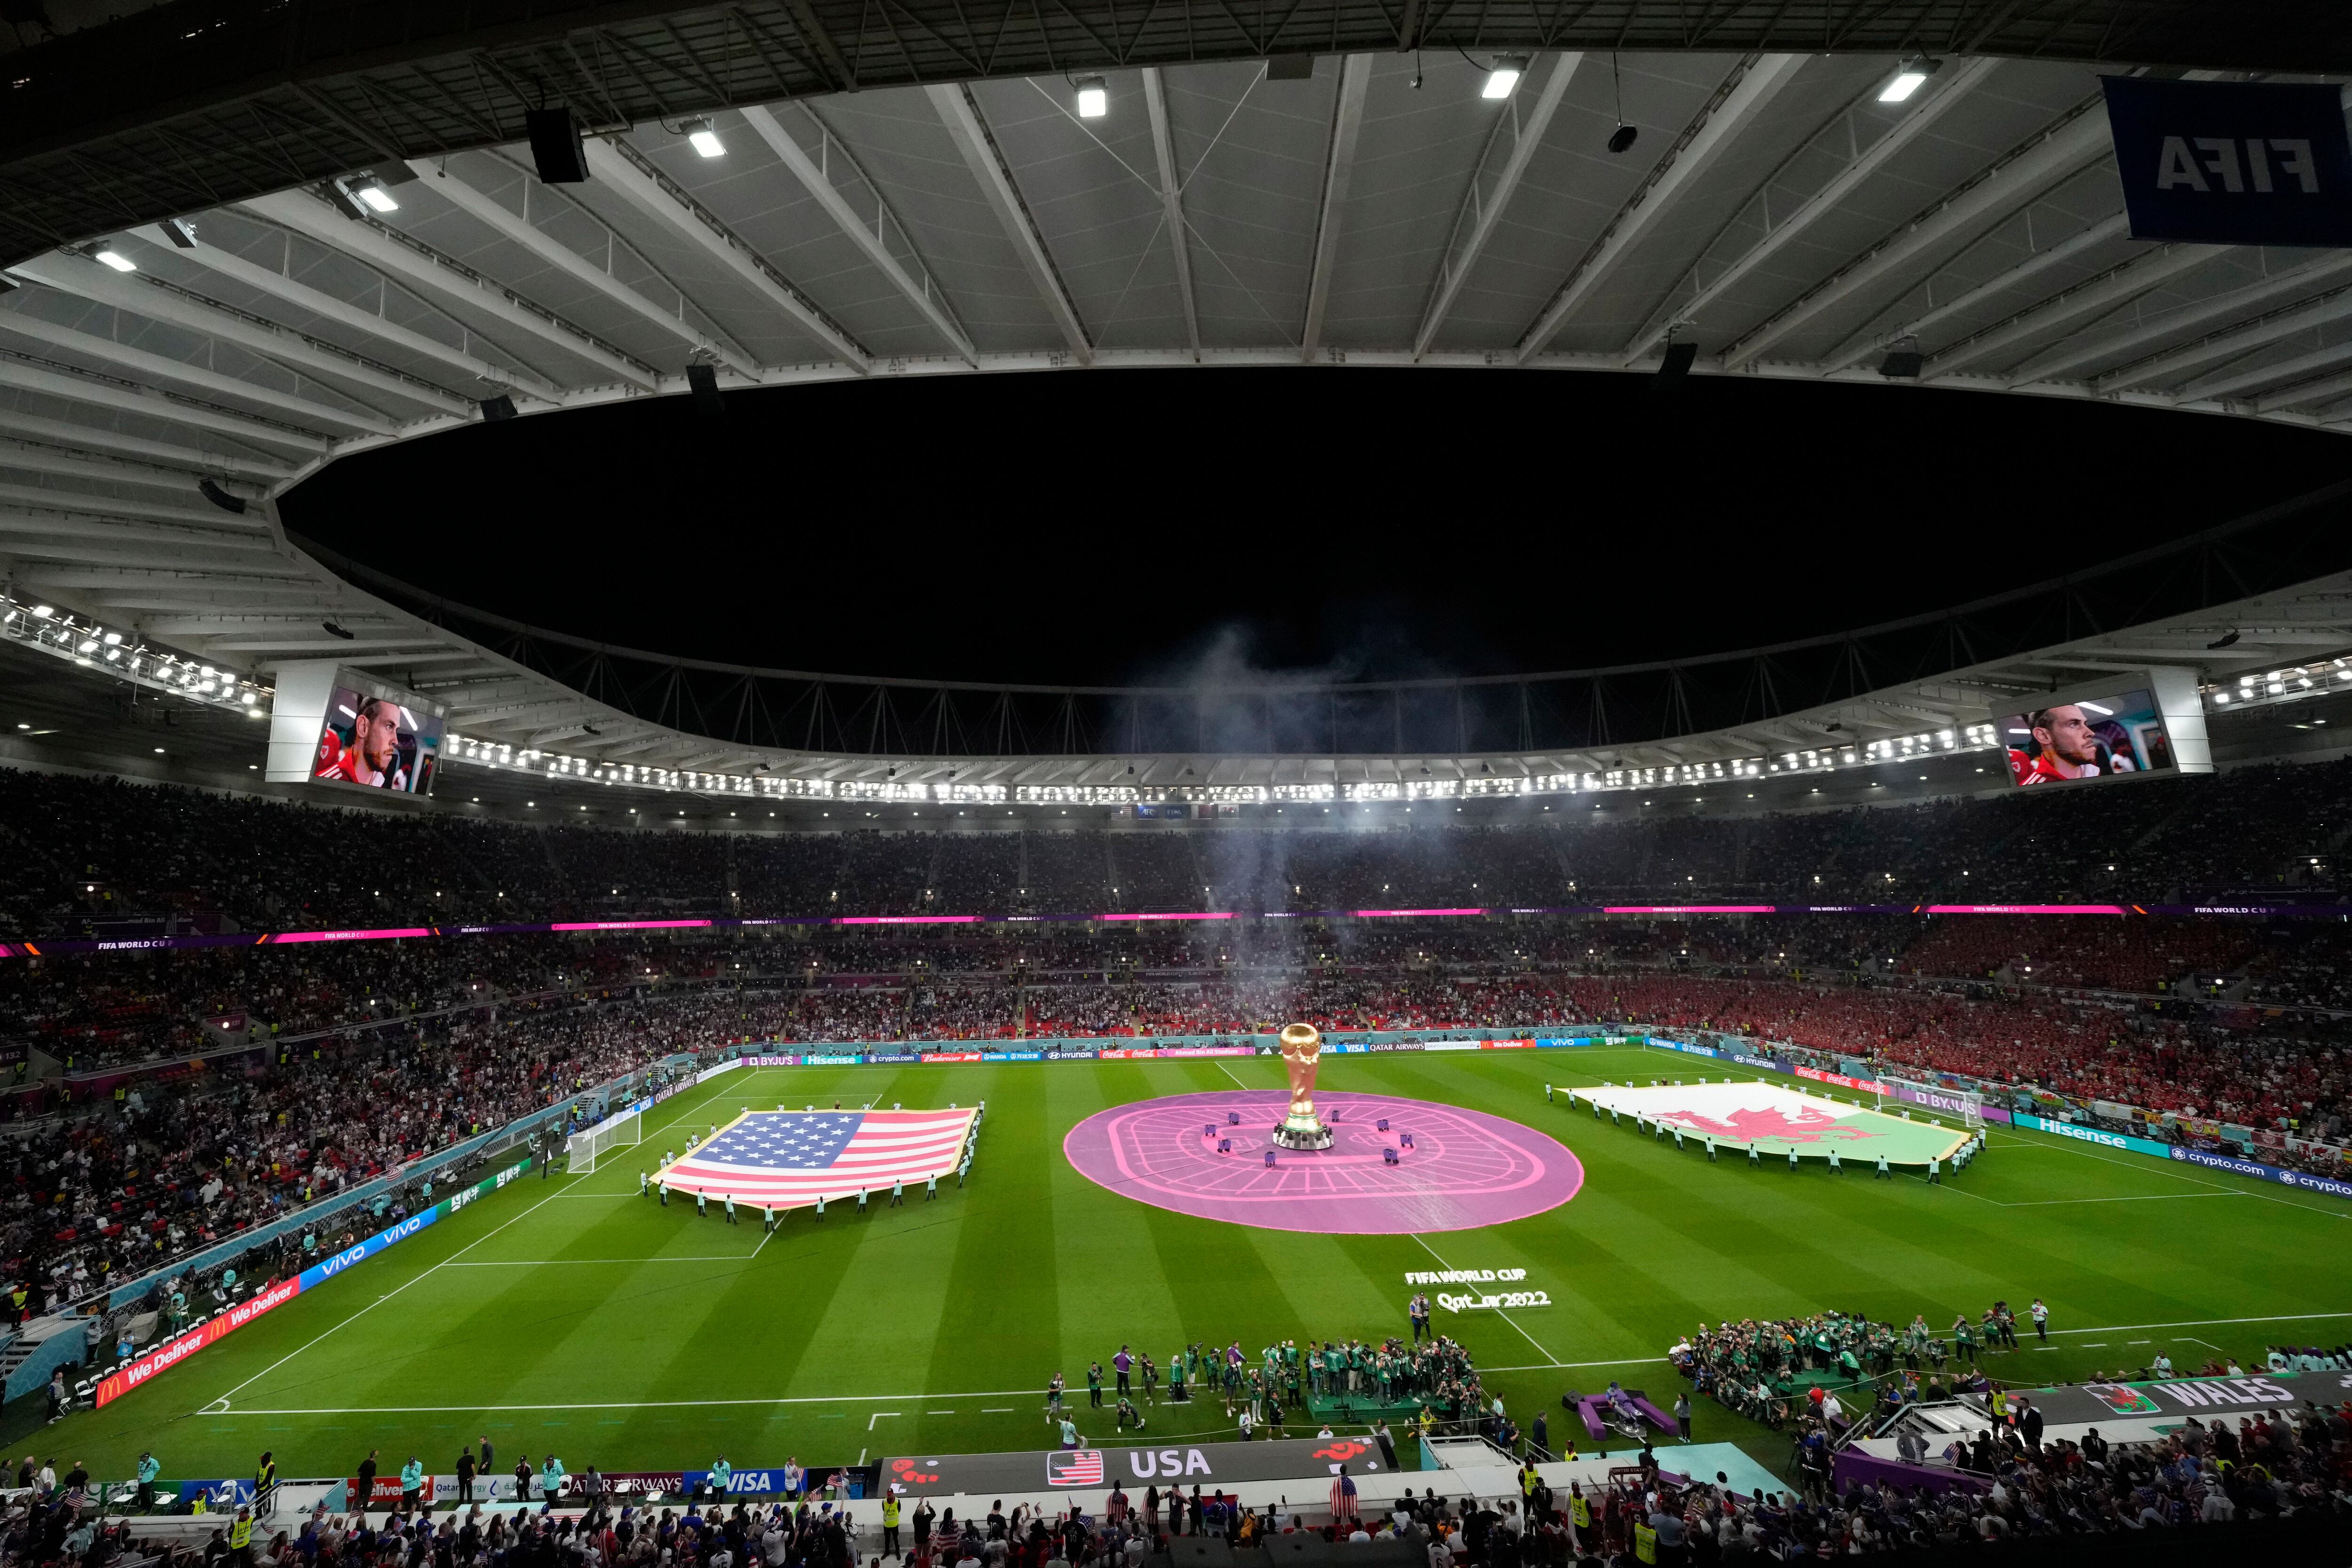 New Olympic Stadium Roof Planned Ahead of 2026 World Cup - Soccer